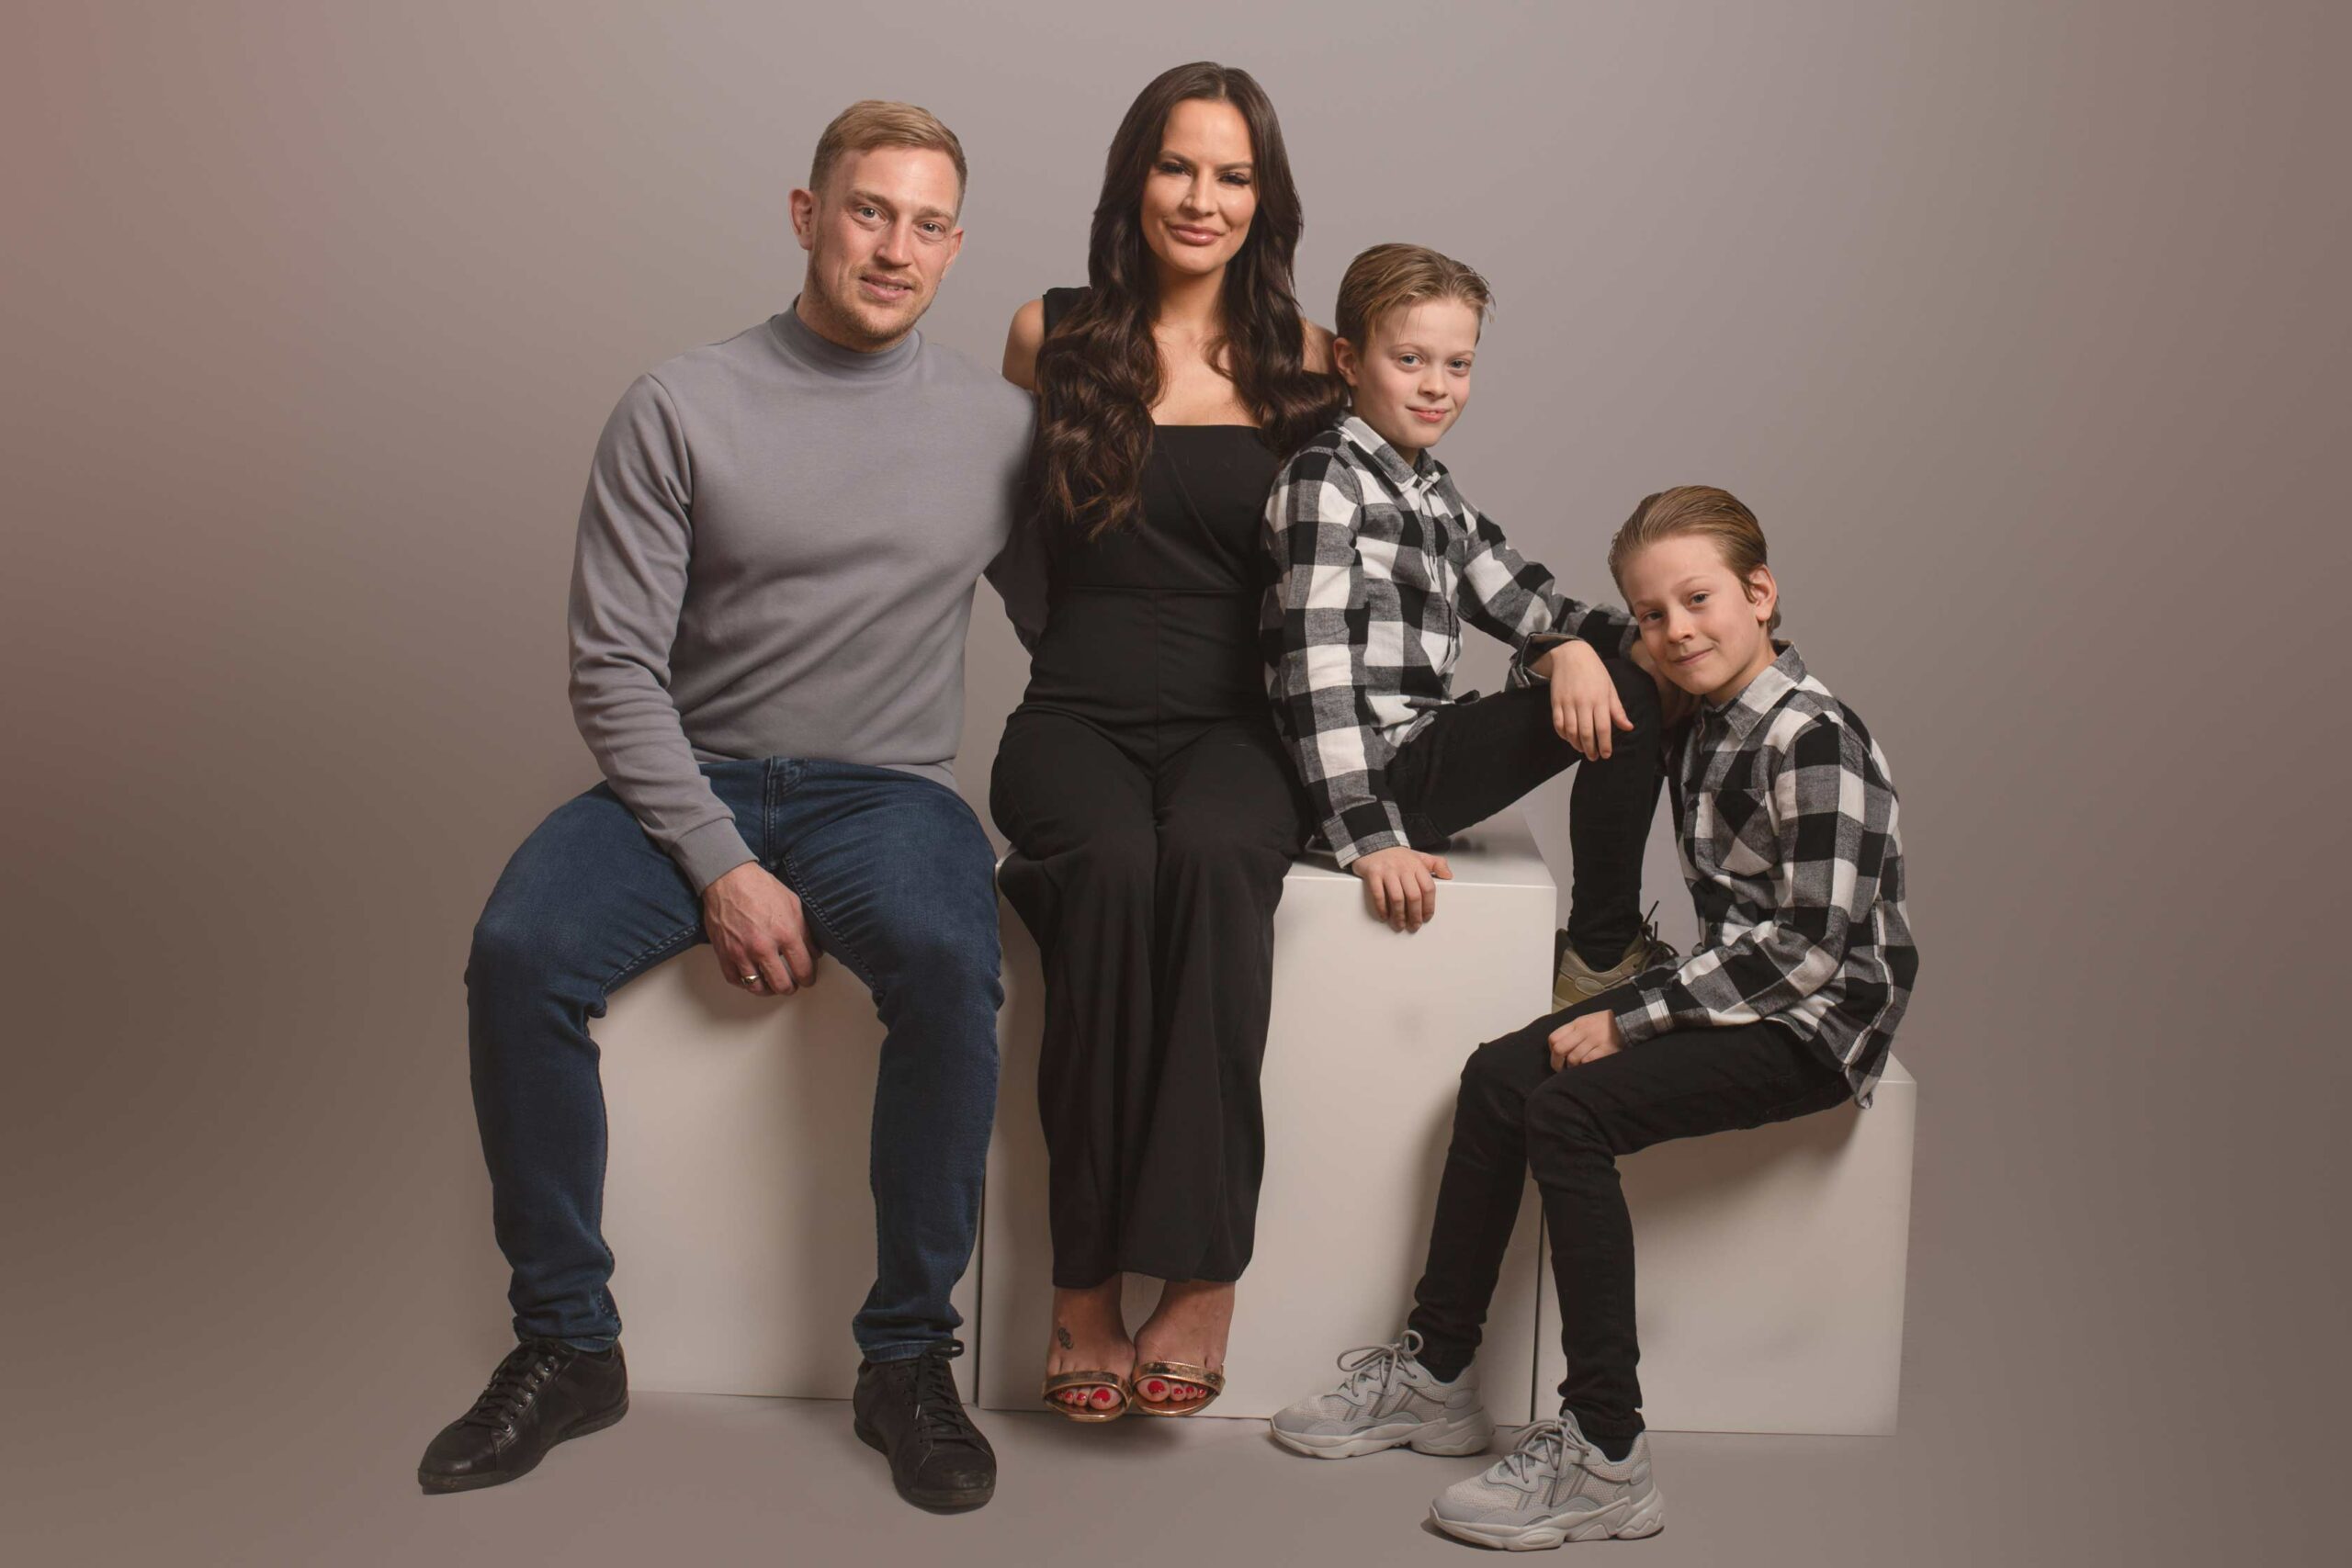 Family photos taken in the studio with cream backdrop. Family are co-ordinating in black and white. Photographed by Hannah Cornford Photography in Strood studio